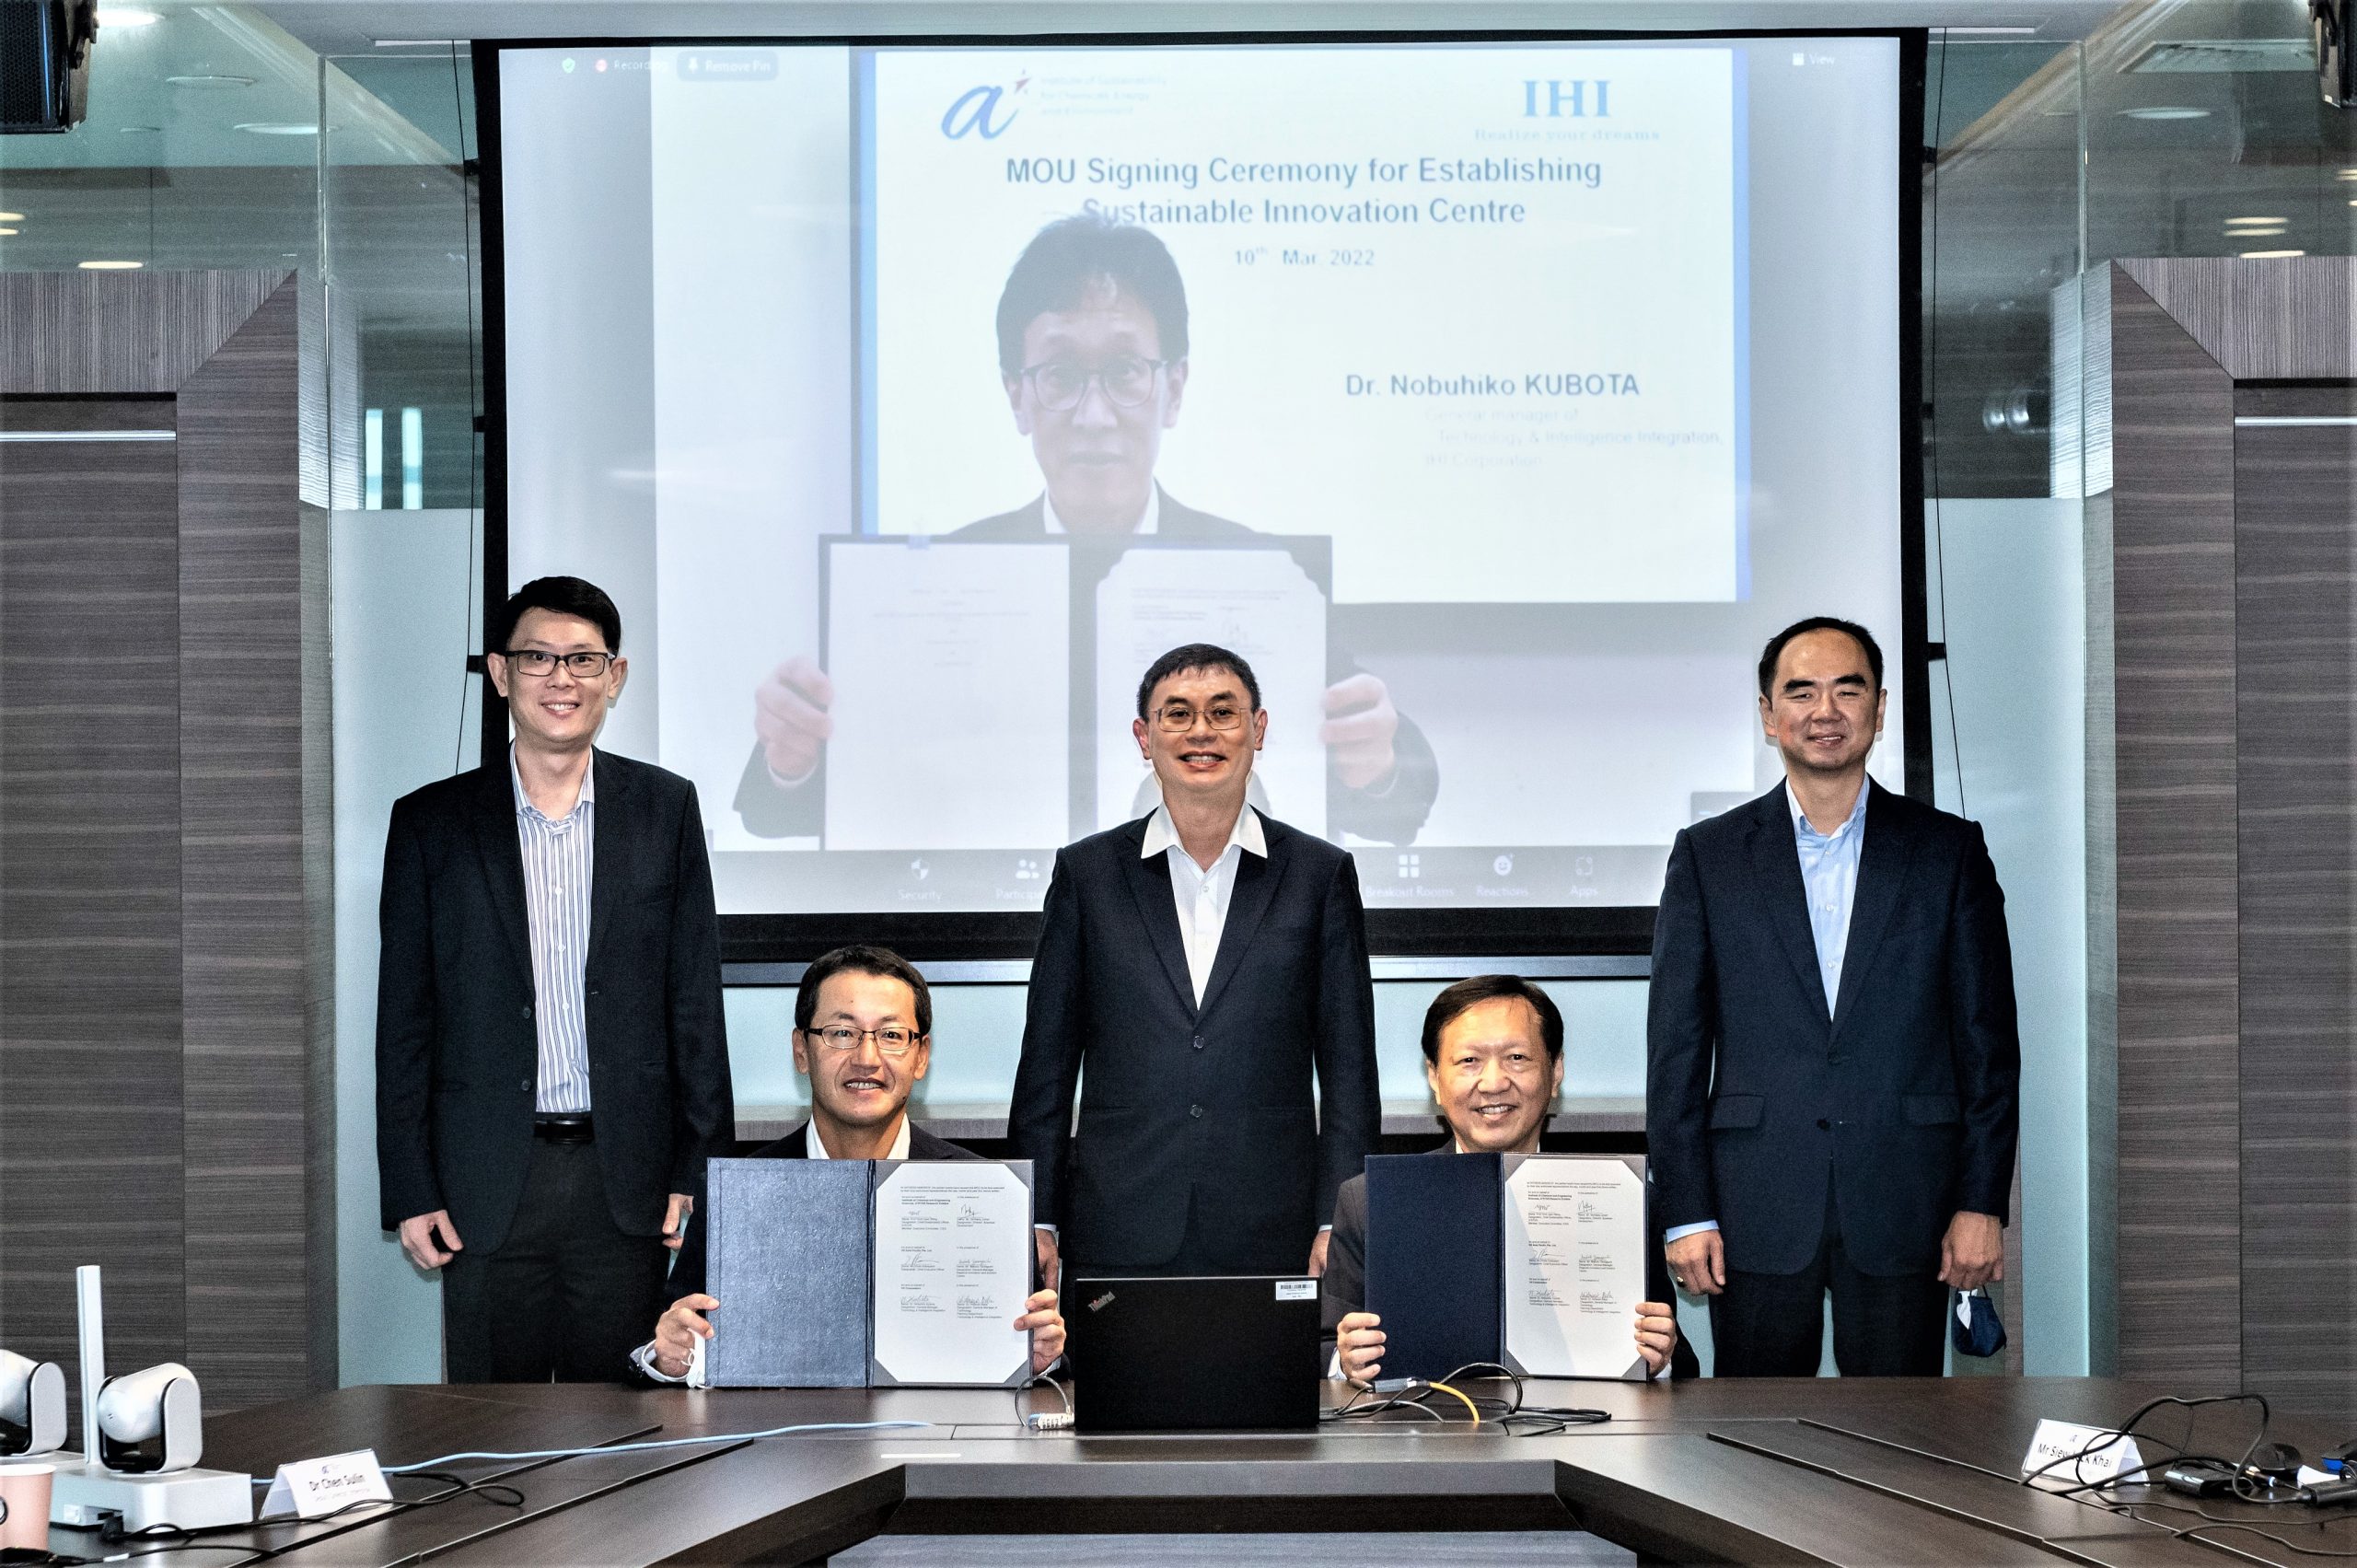 IHI develops environmental technology for the Asia-Pacific region in Singapore, taking on the challenge of rebuilding sustainable infrastructure